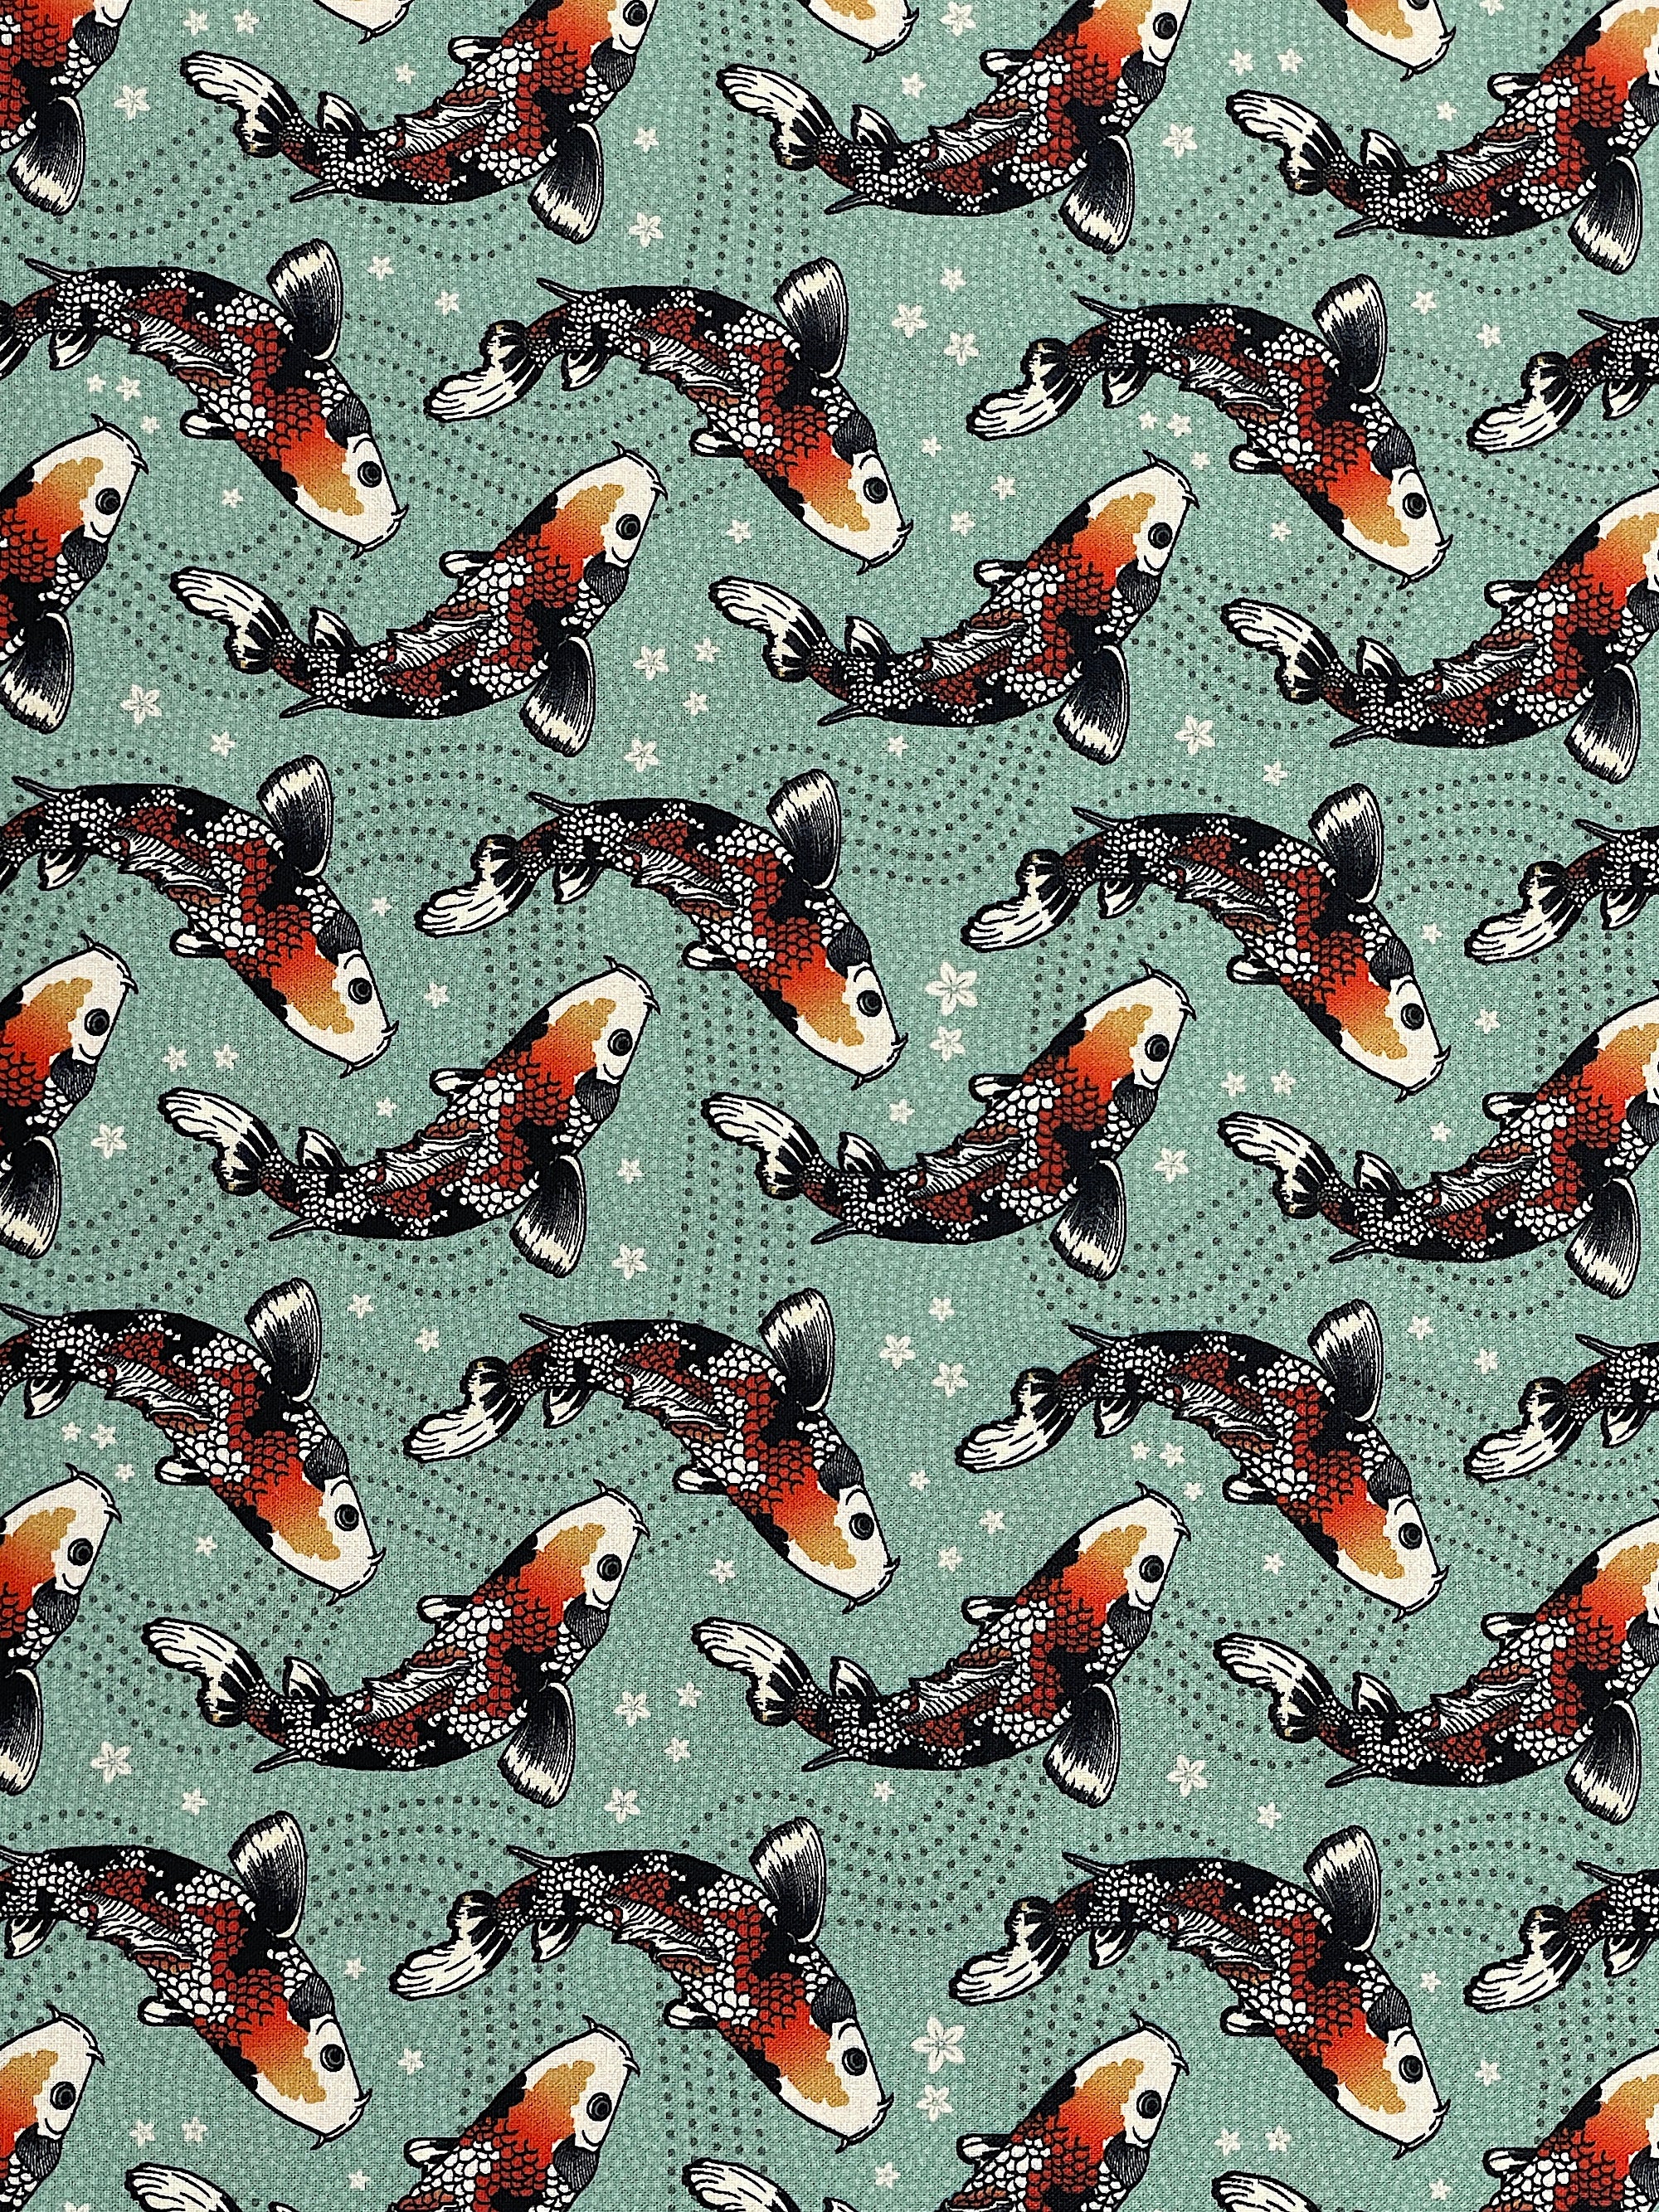 This fabric is part of the Kimonos &amp; Koi collection by Paintbrush Studios.&nbsp; This green fabric is covered with koi.